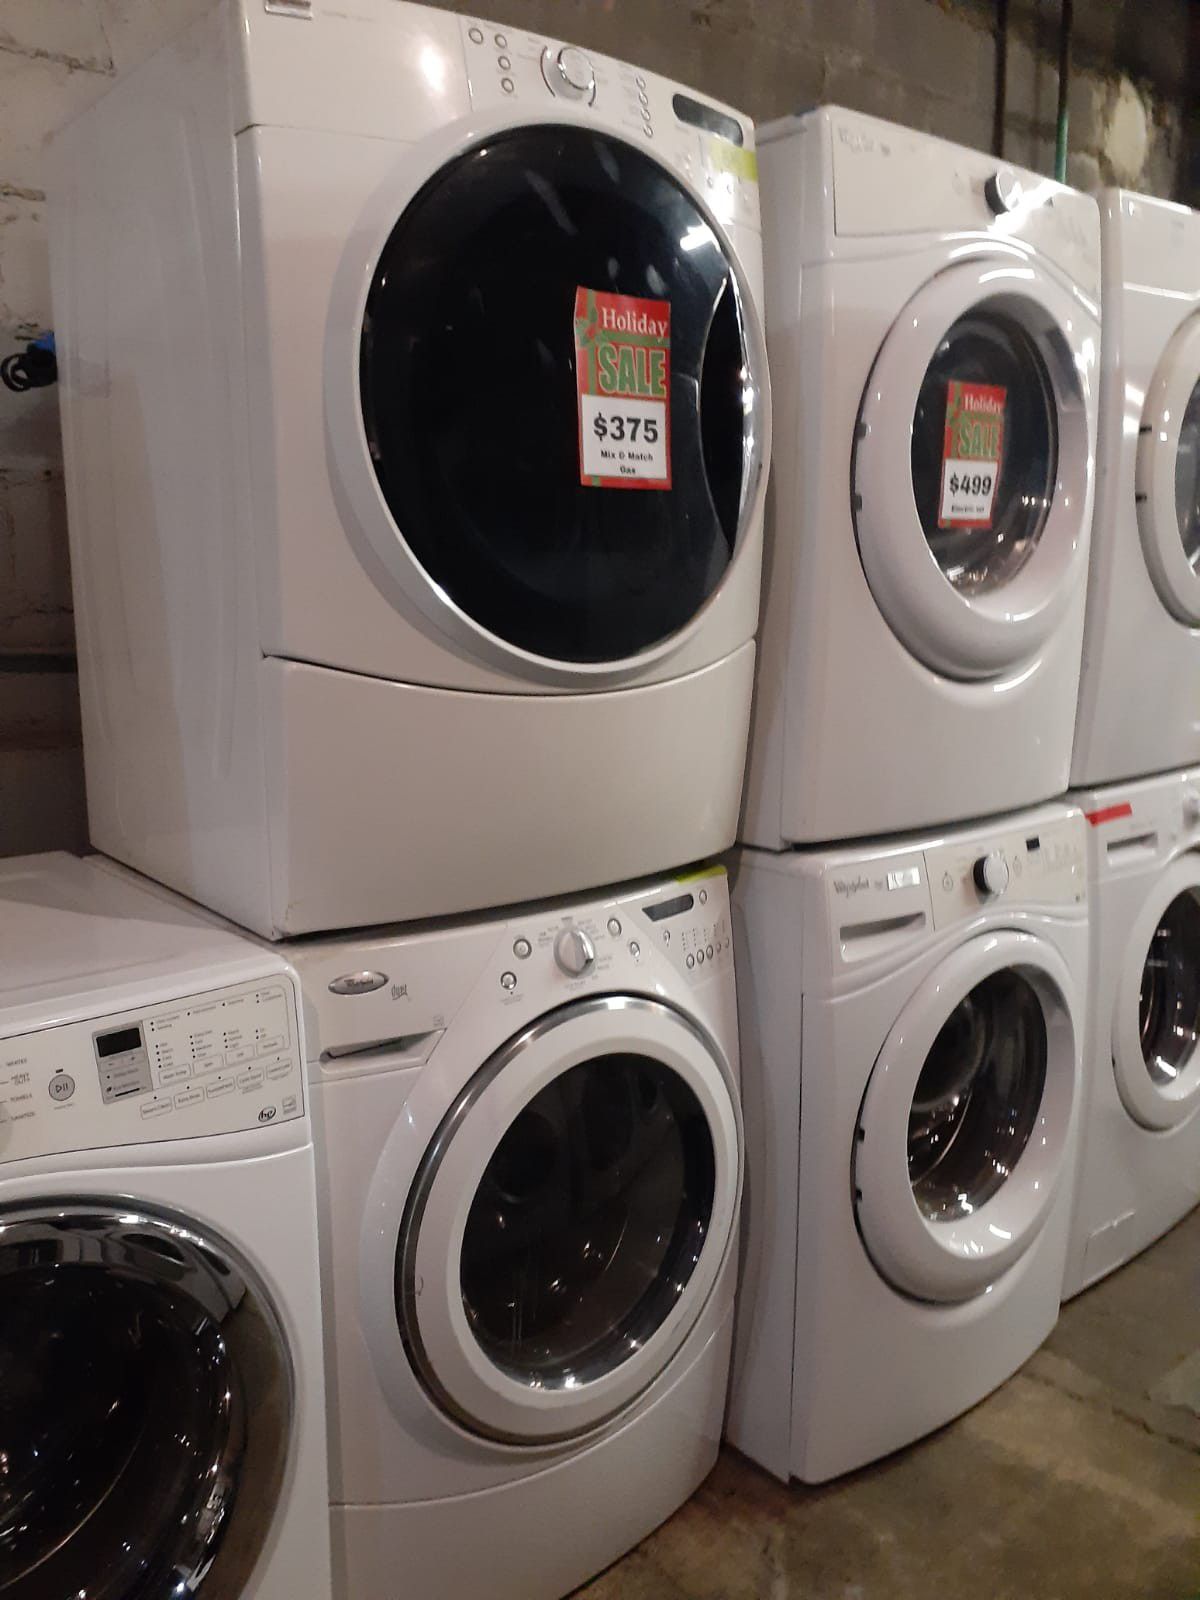 Mix and match front load washer and gas dryer set working perfectly with 4 months warranty